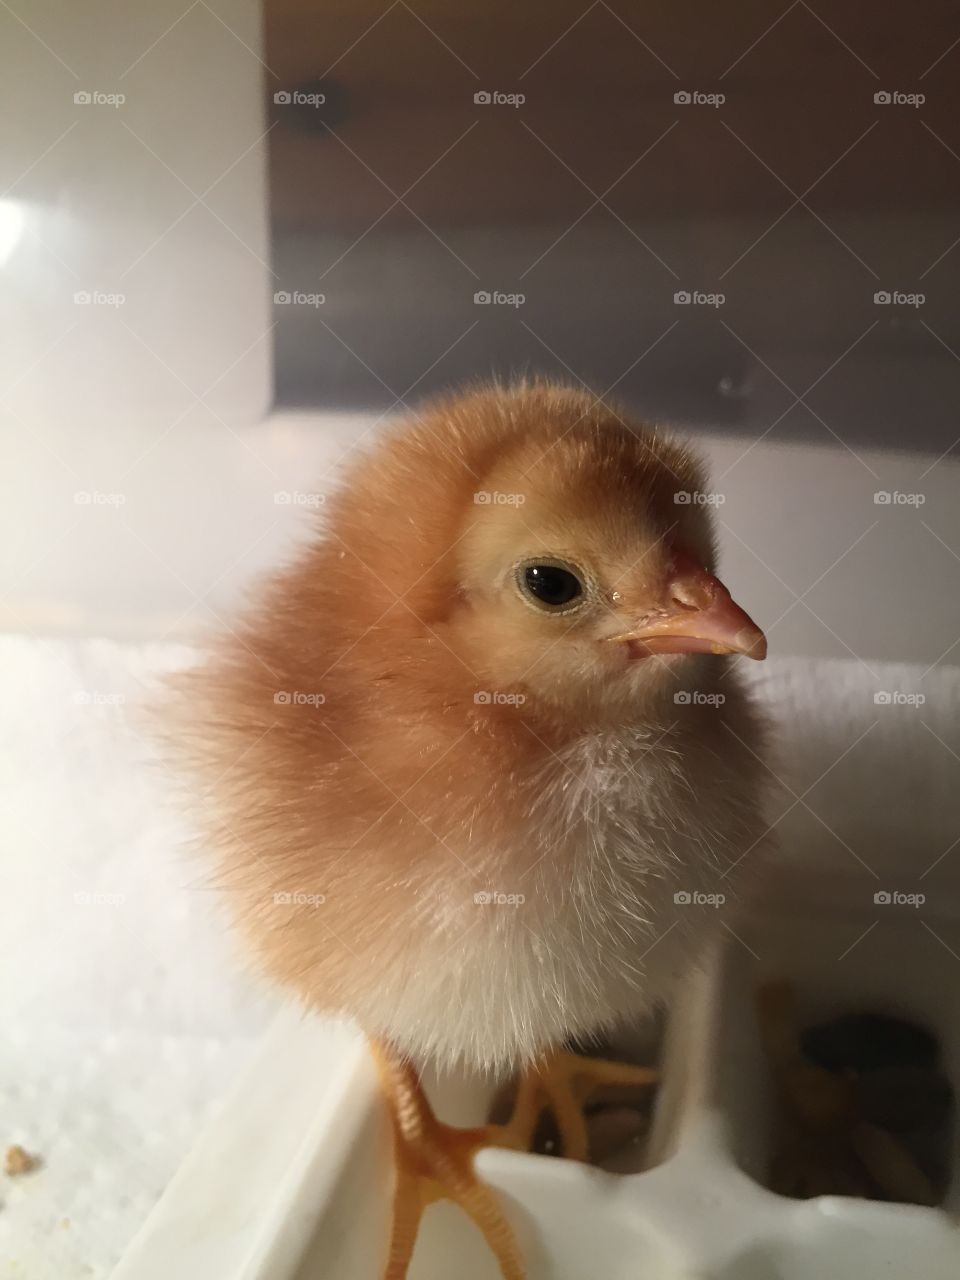 3 day old chick 